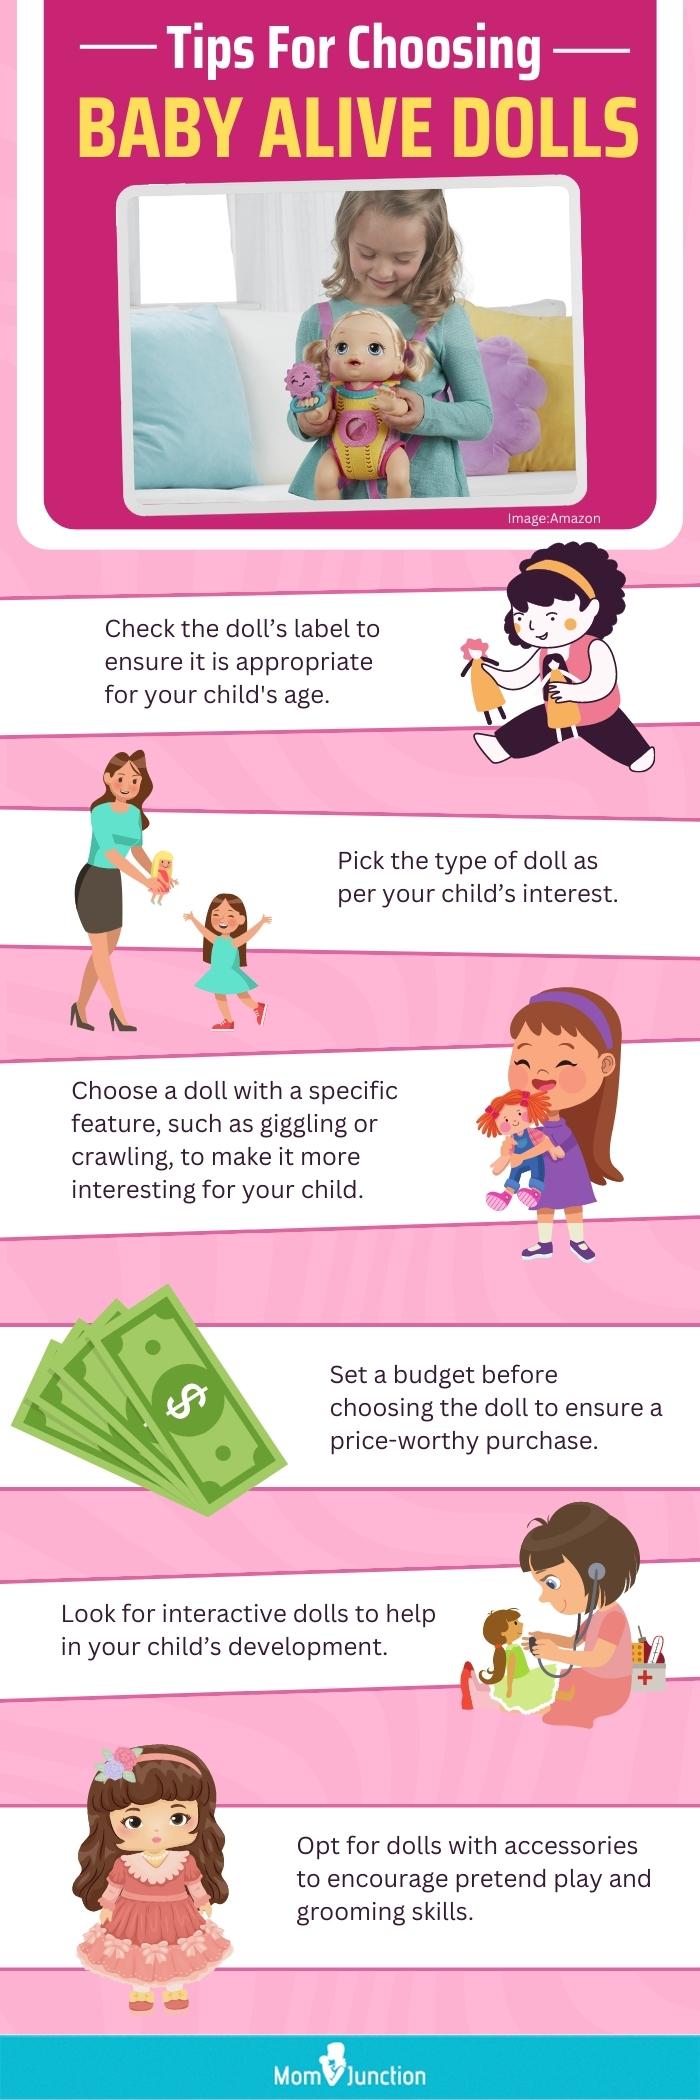 Tips For Choosing Baby Alive Dolls (infographic)